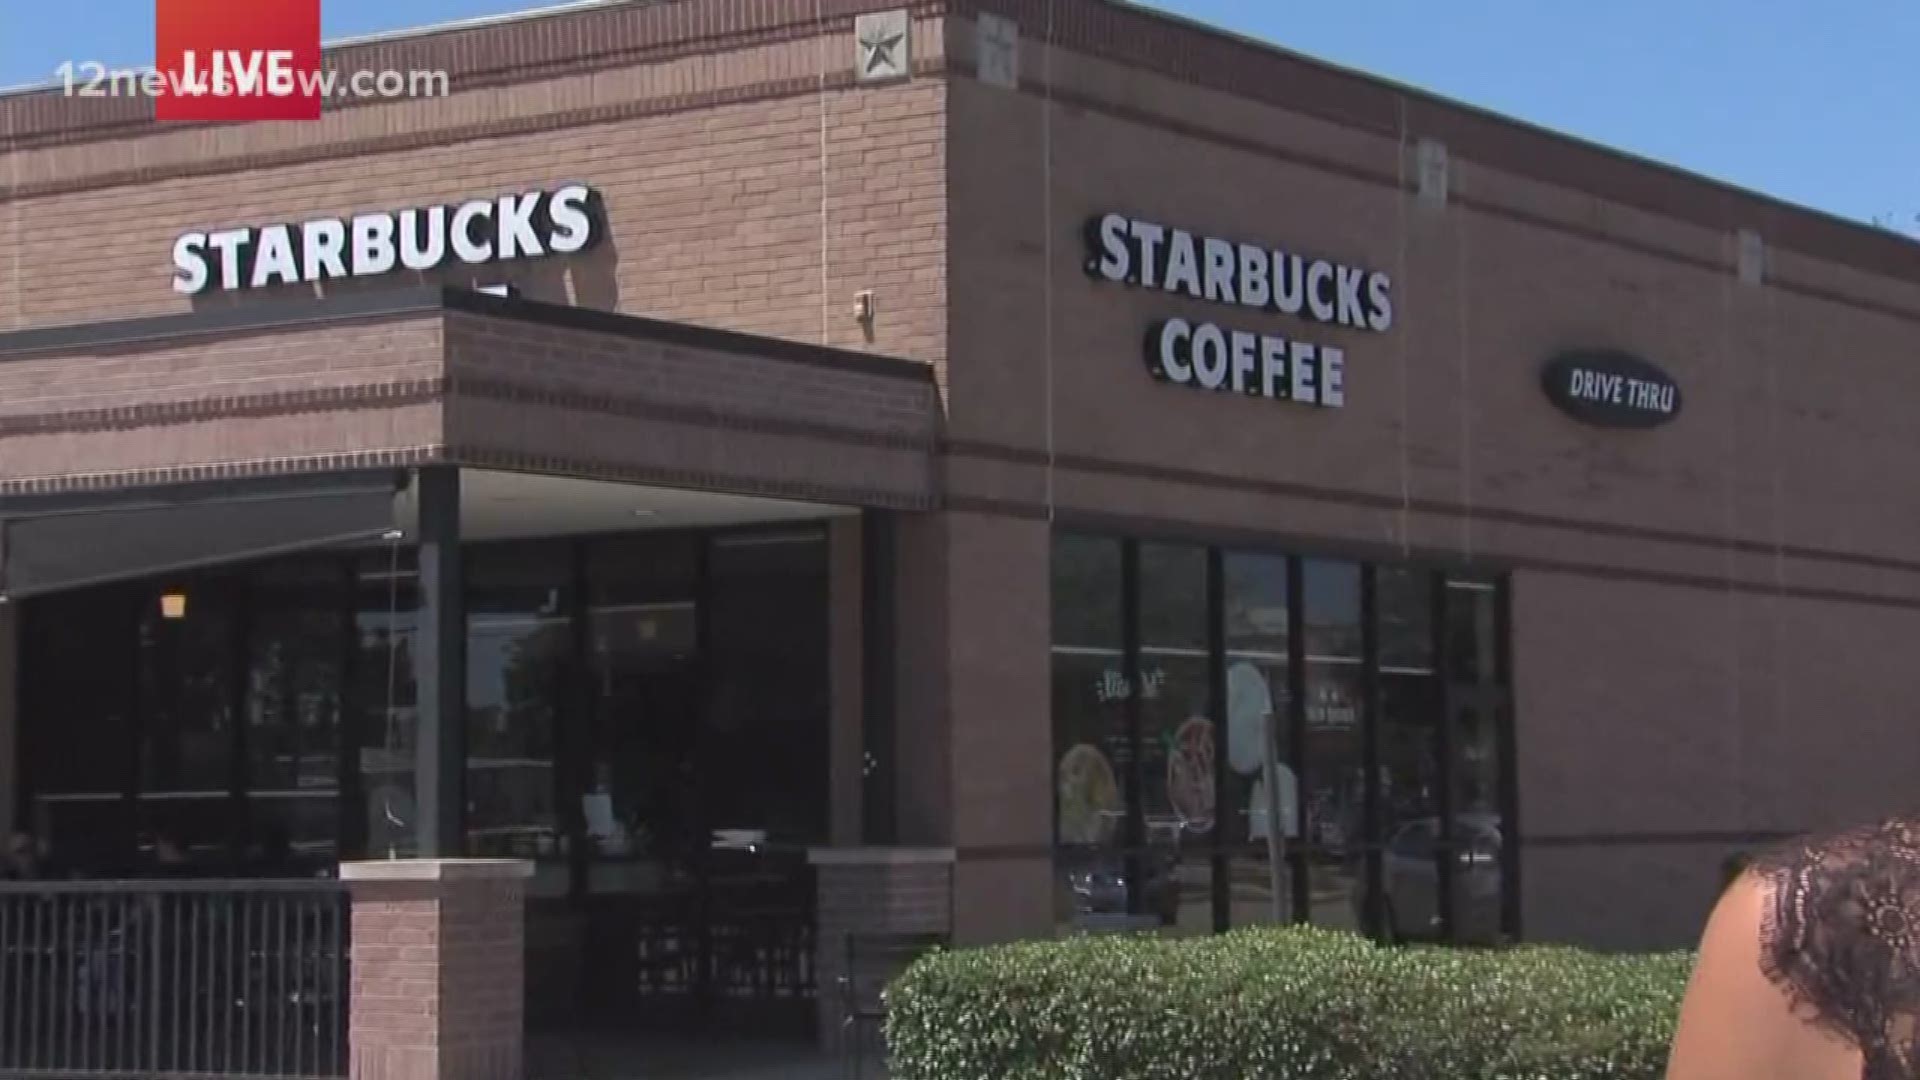 Police: 'Legitimate device' inside suspicious package found at Beaumont Starbucks